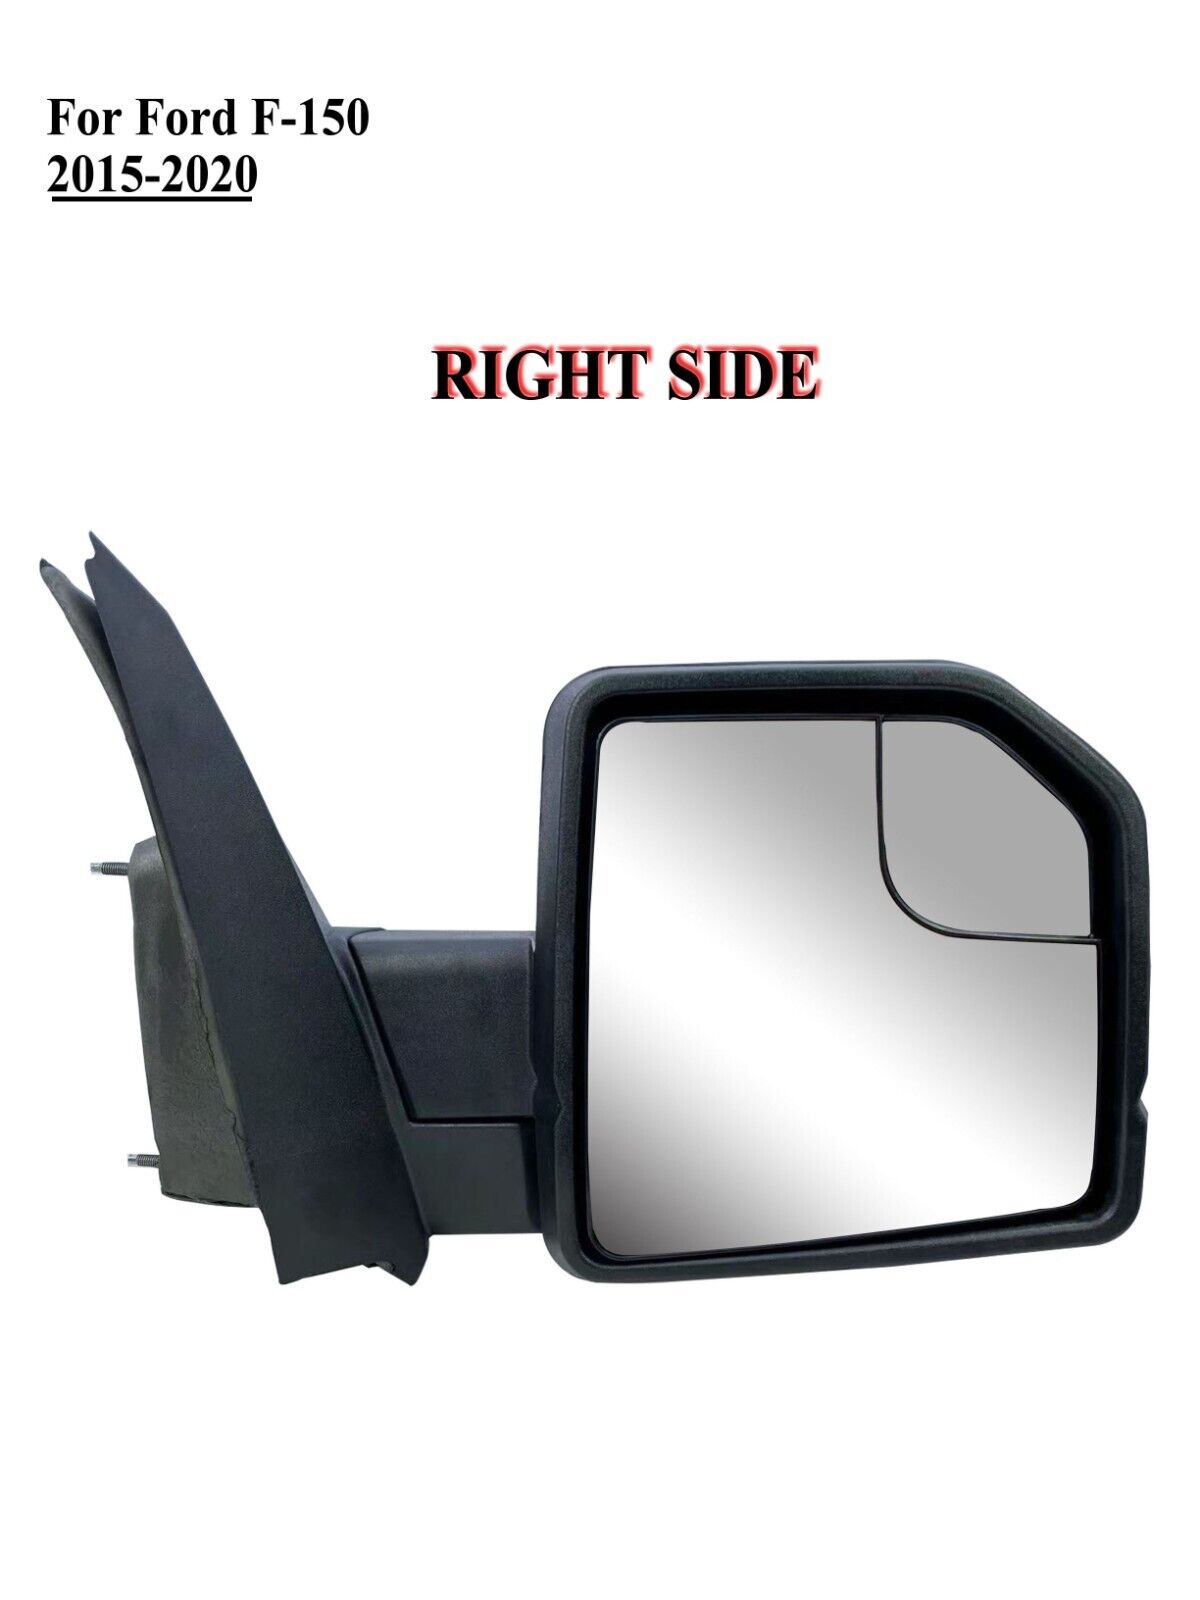 Passenger Right Side Mirror Power Glass Manual Folding for 2015to2020 Ford F-150